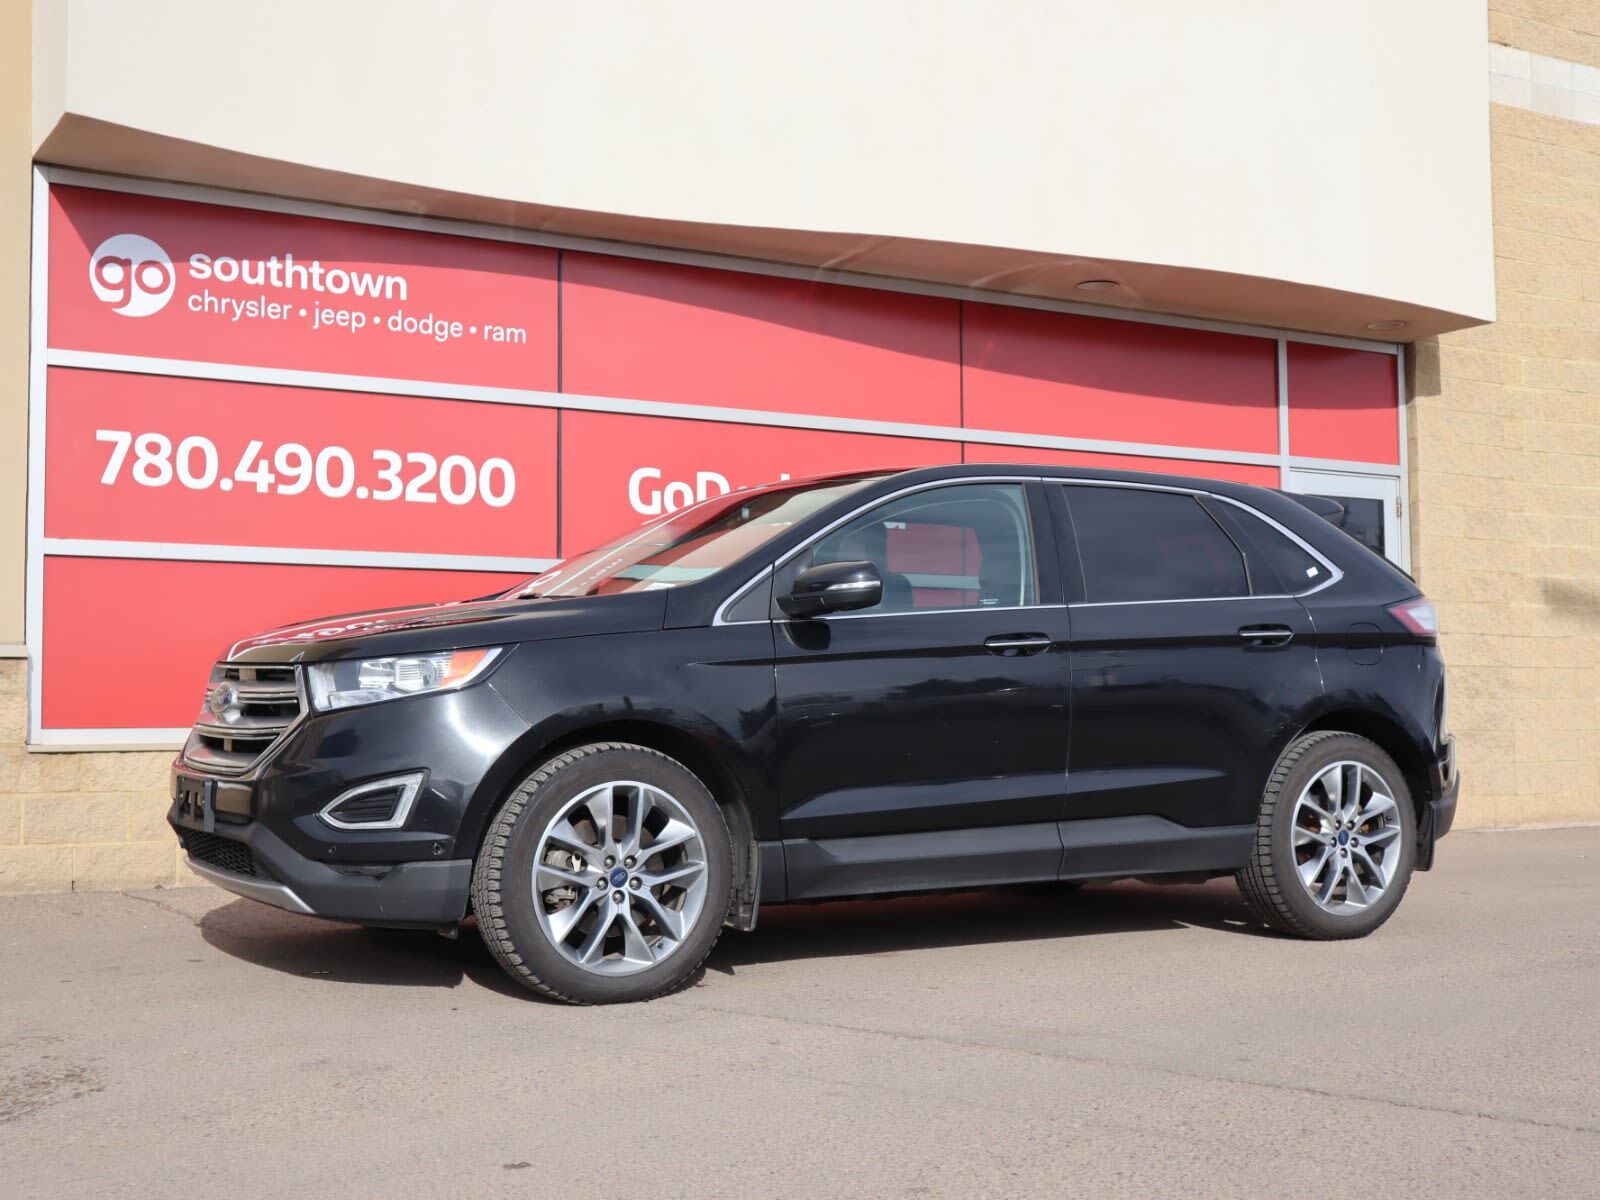 2015 Ford Edge TITANIUM IN TUXEDO BLACK EQUIPPED WITH A 3.5L V6 ,